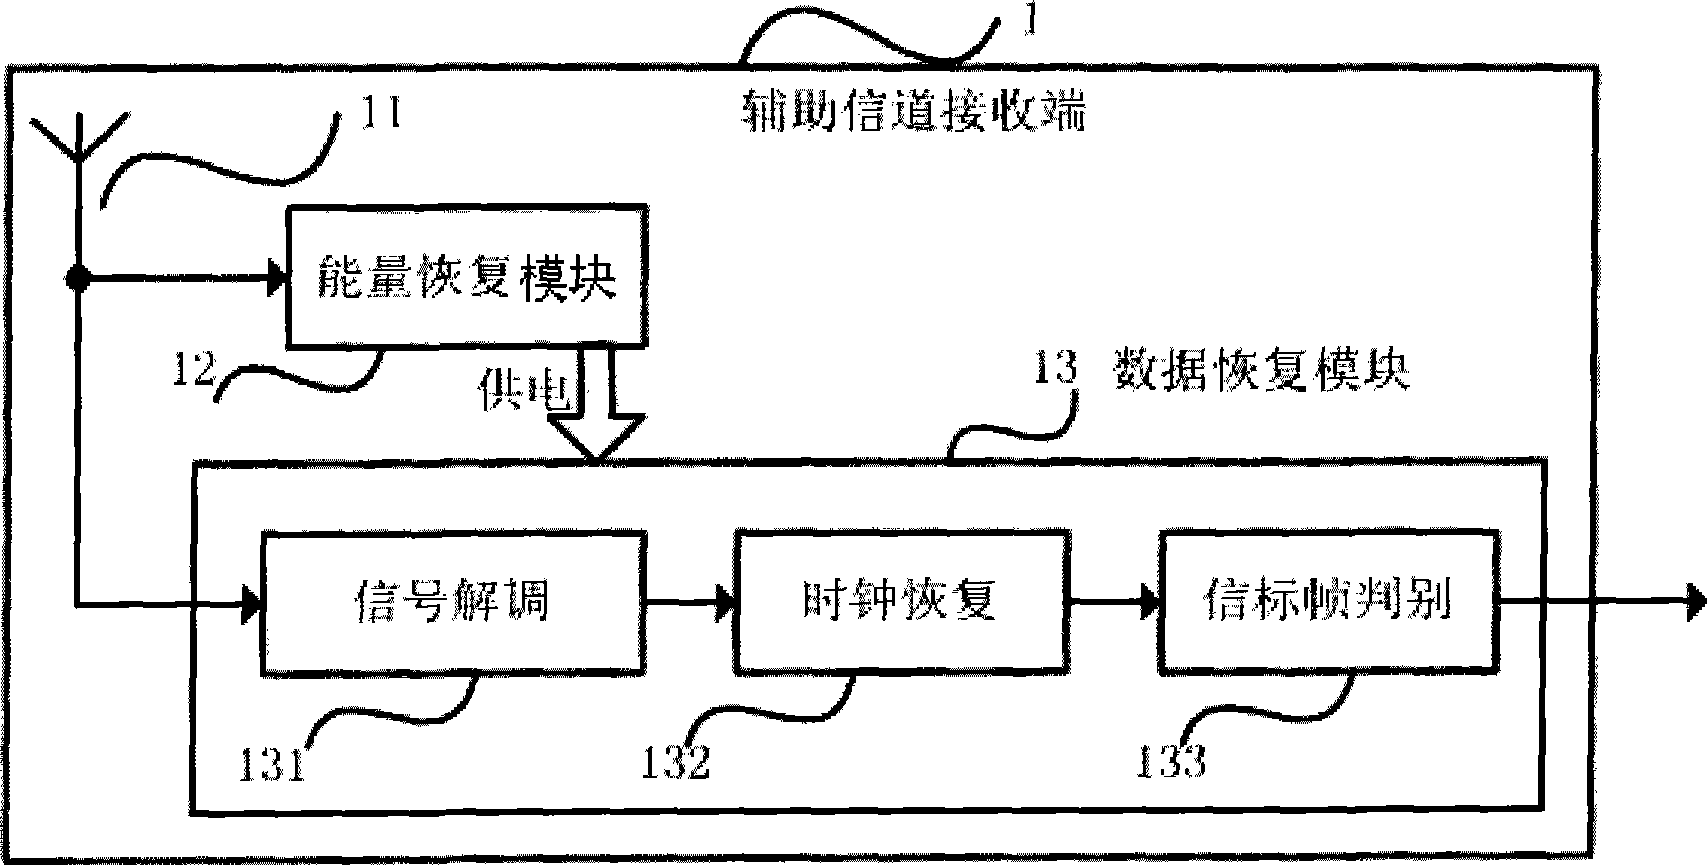 Wireless communication network transmission structure and method